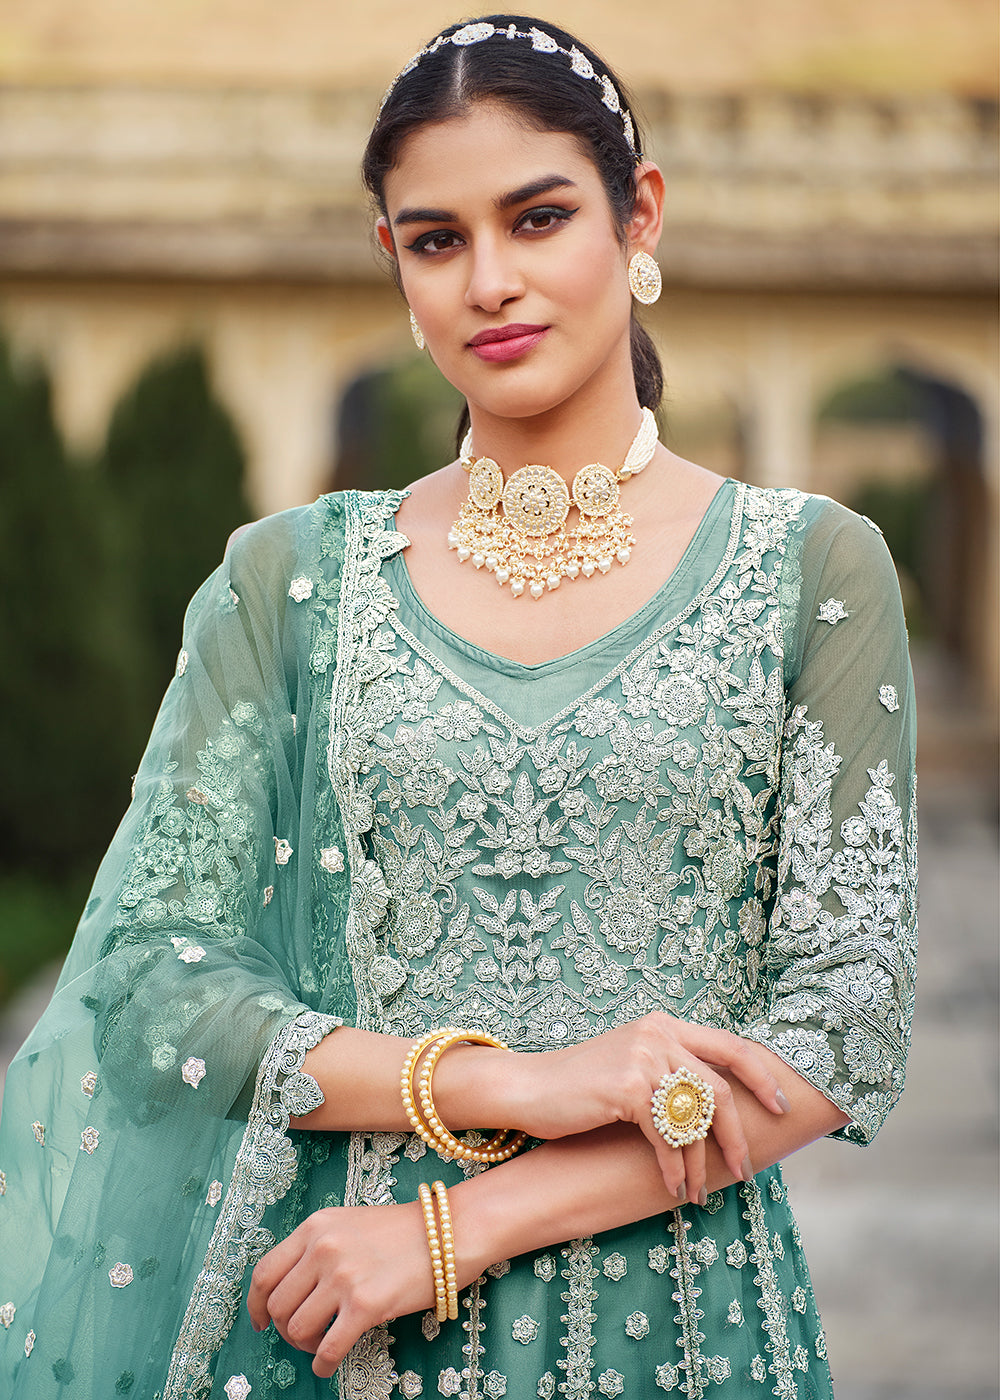 Buy Now Butterfly Net Green Embroidered Wedding Bridesmaid Anarkali Suit Online in USA, UK, Australia, New Zealand, Canada, Italy & Worldwide at Empress Clothing.